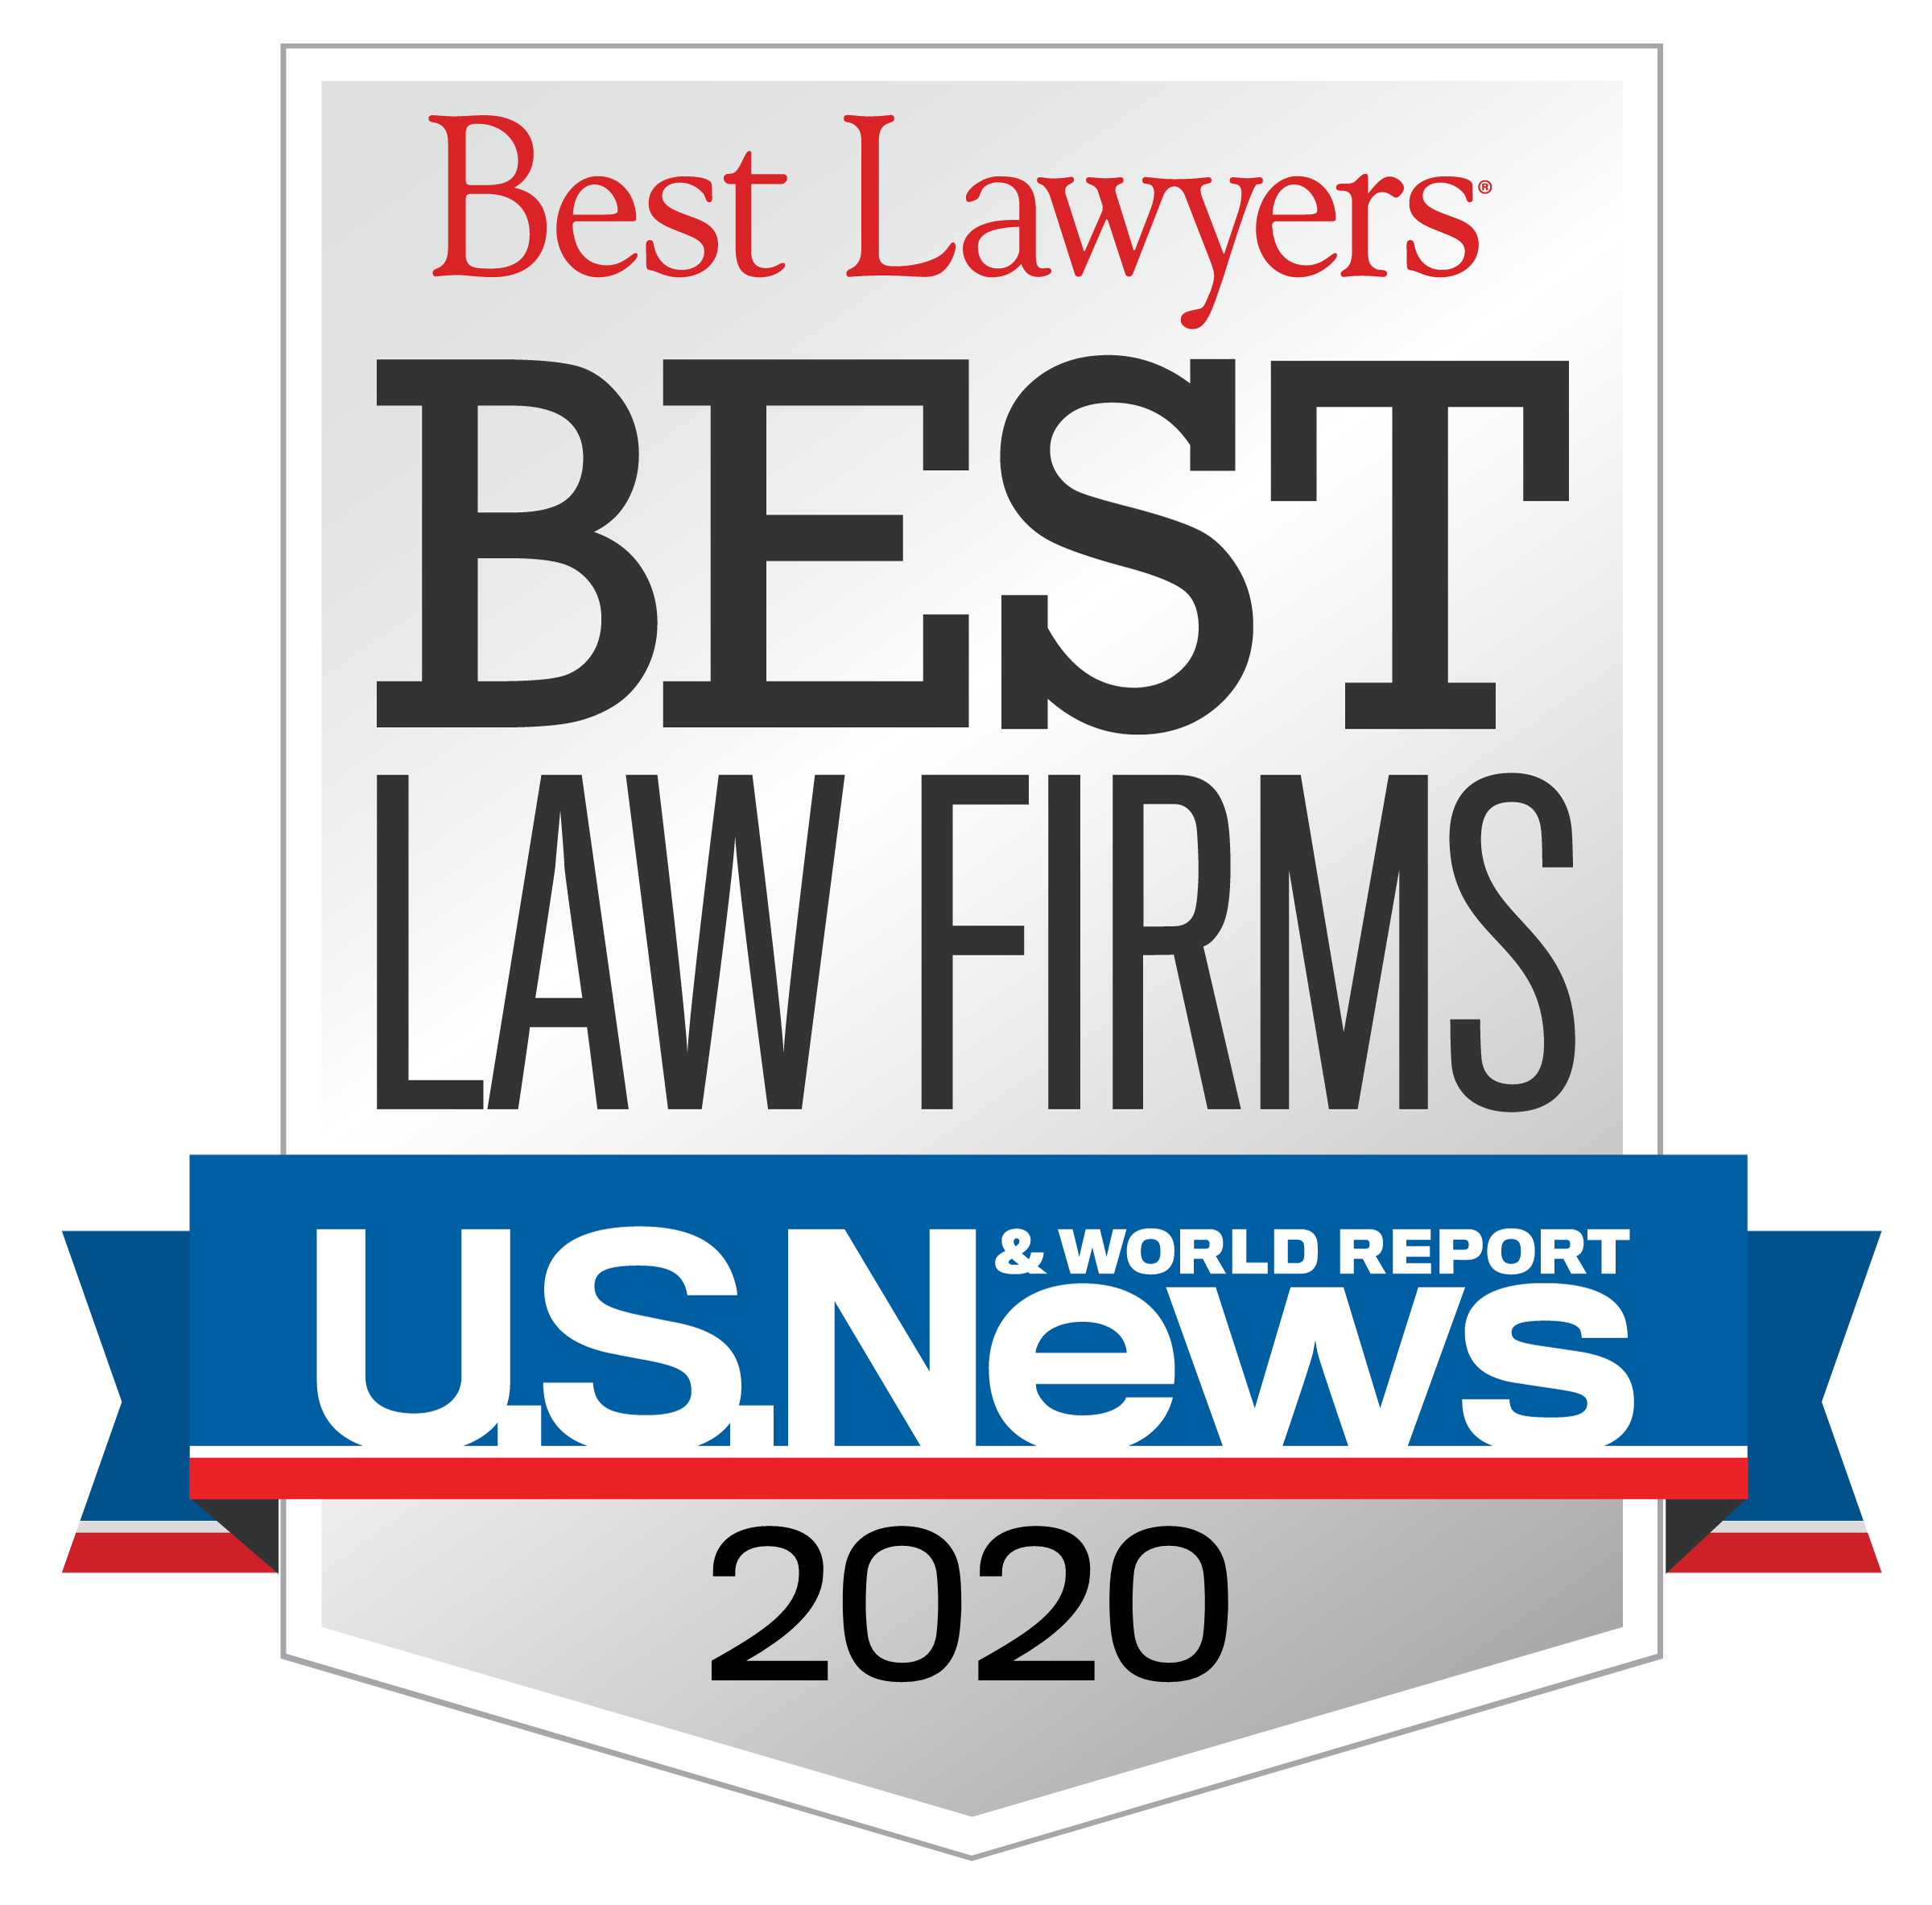 Best Law Firms of 2020